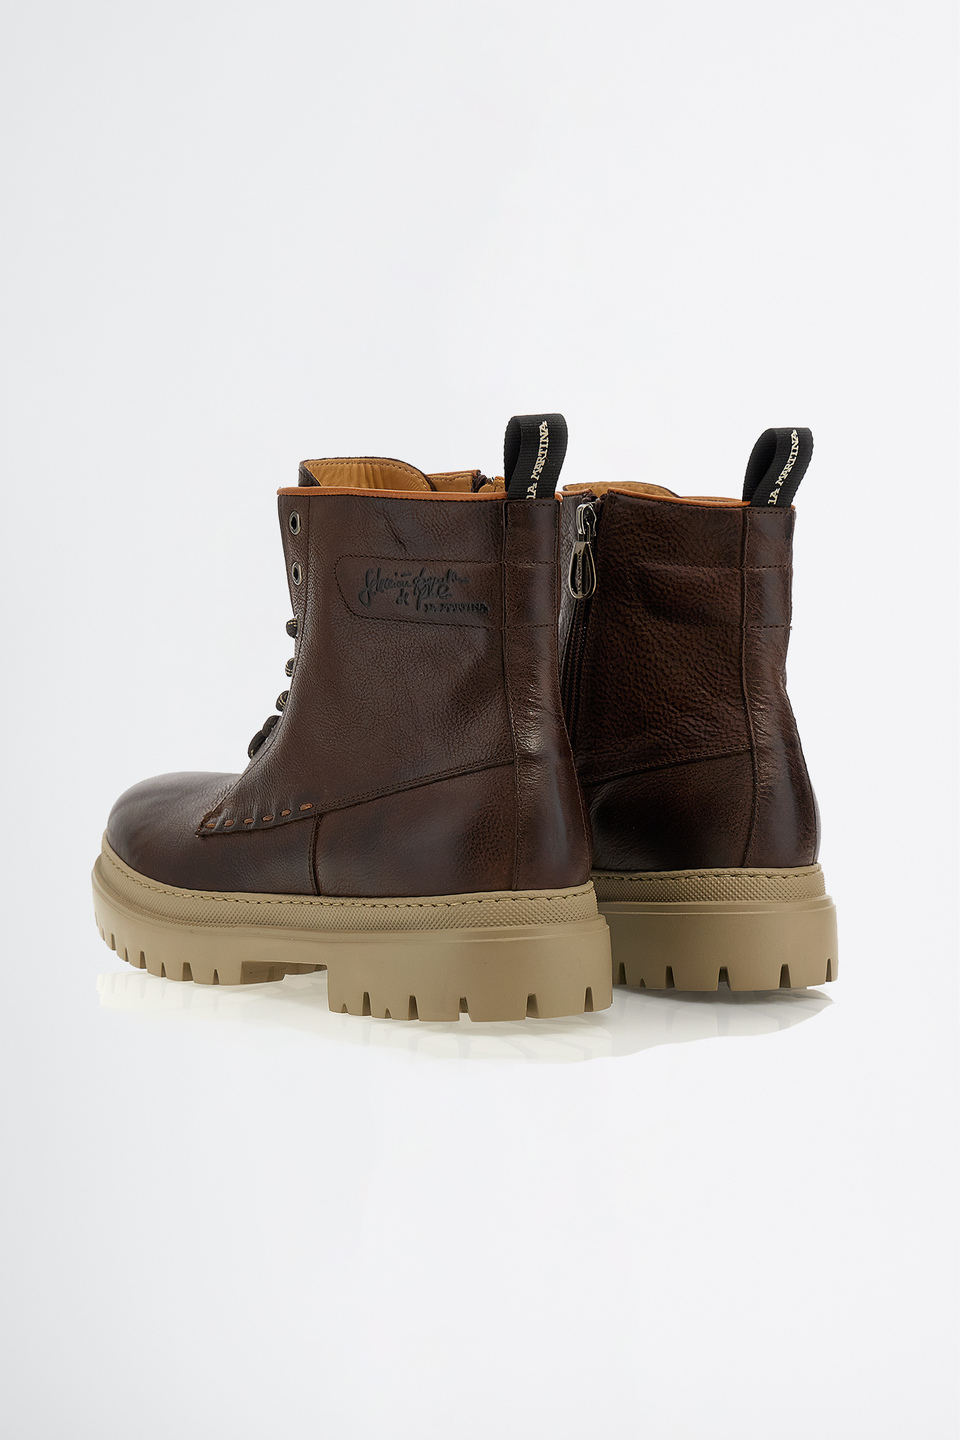 Mountain ankle boot in leather | La Martina - Official Online Shop